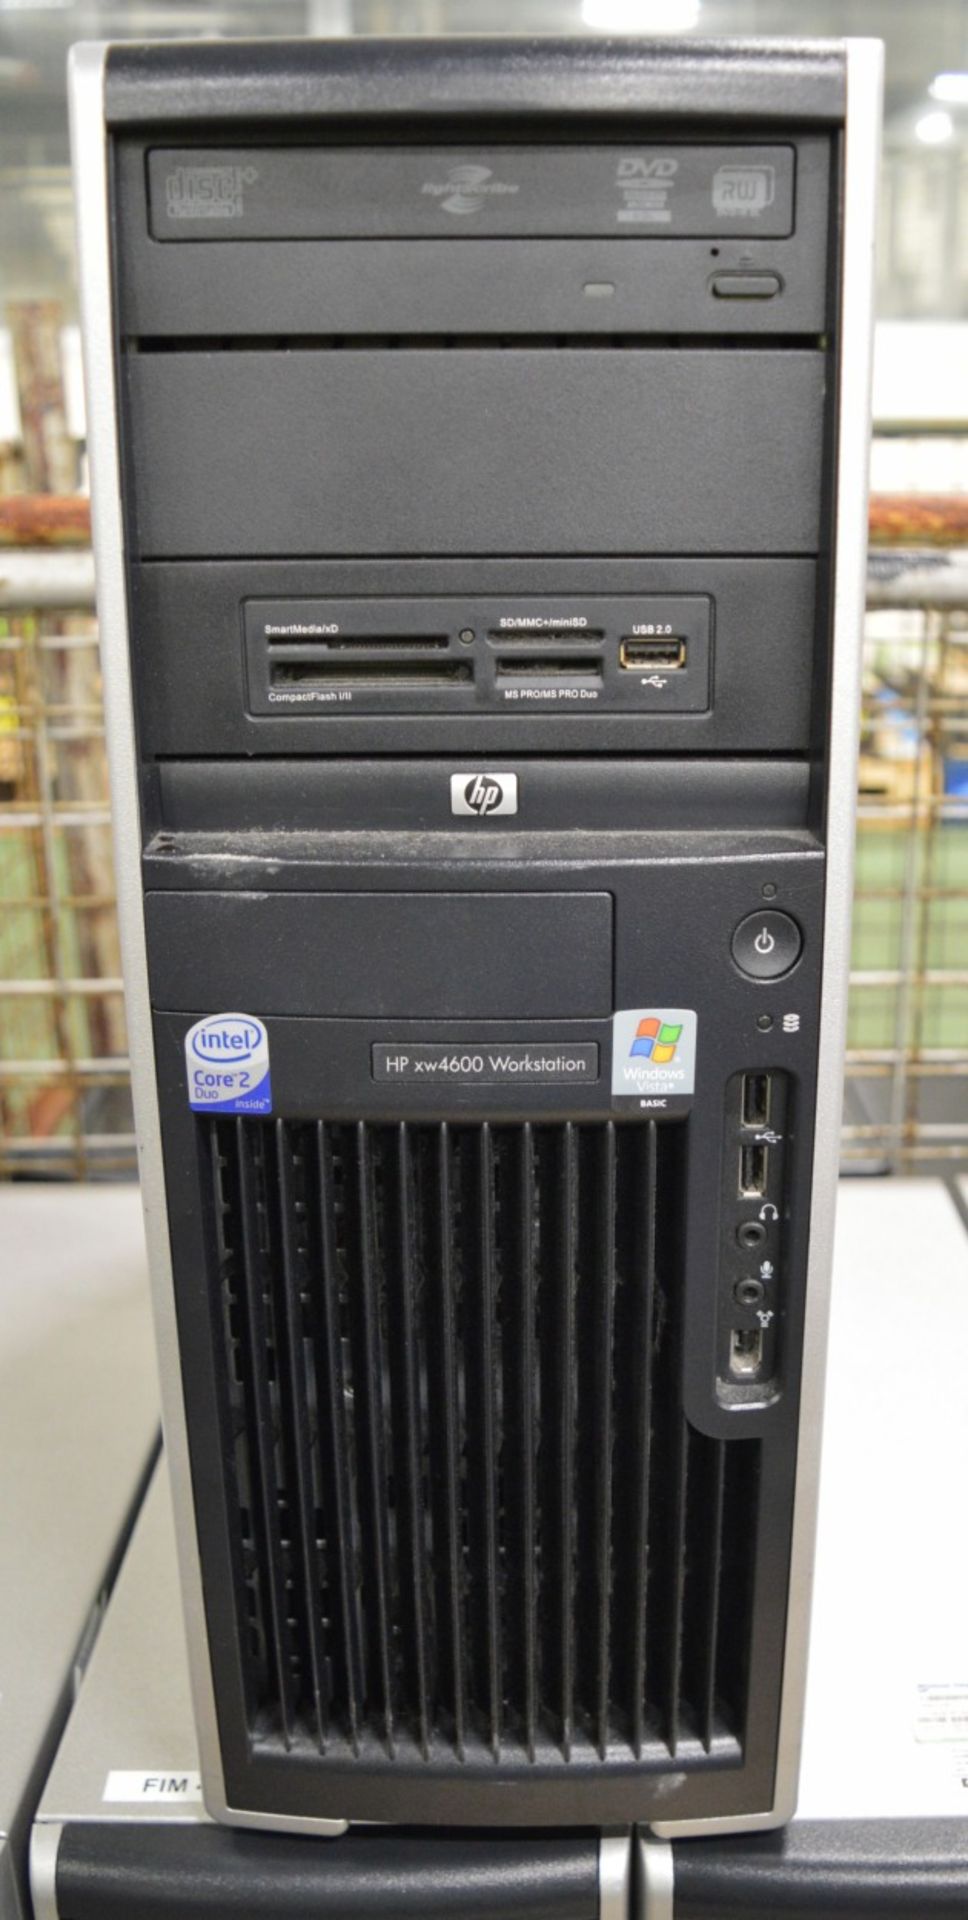 7x HP xw46000 Workstations - Image 2 of 2